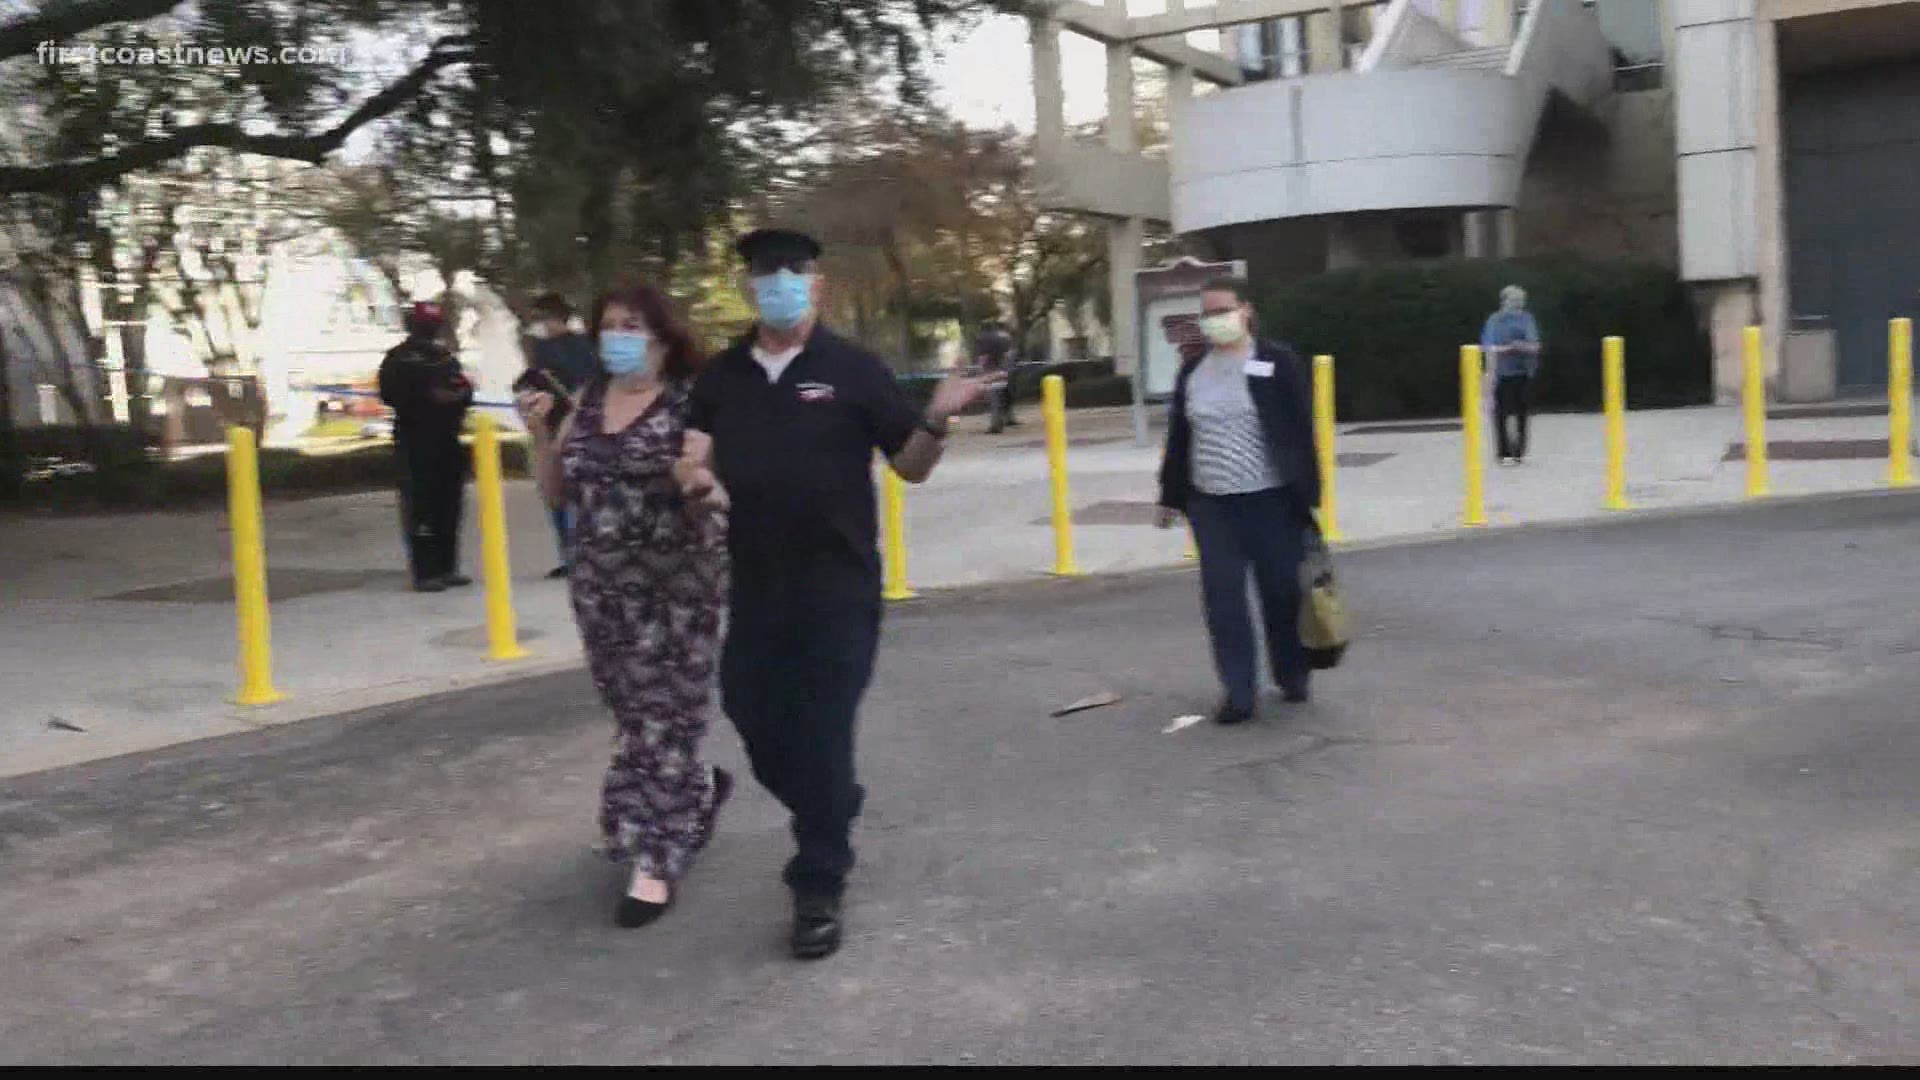 There are no vaccinations at the Prime Osborn Convention Center Thursday or Friday, but that did not stop confused people from showing up.